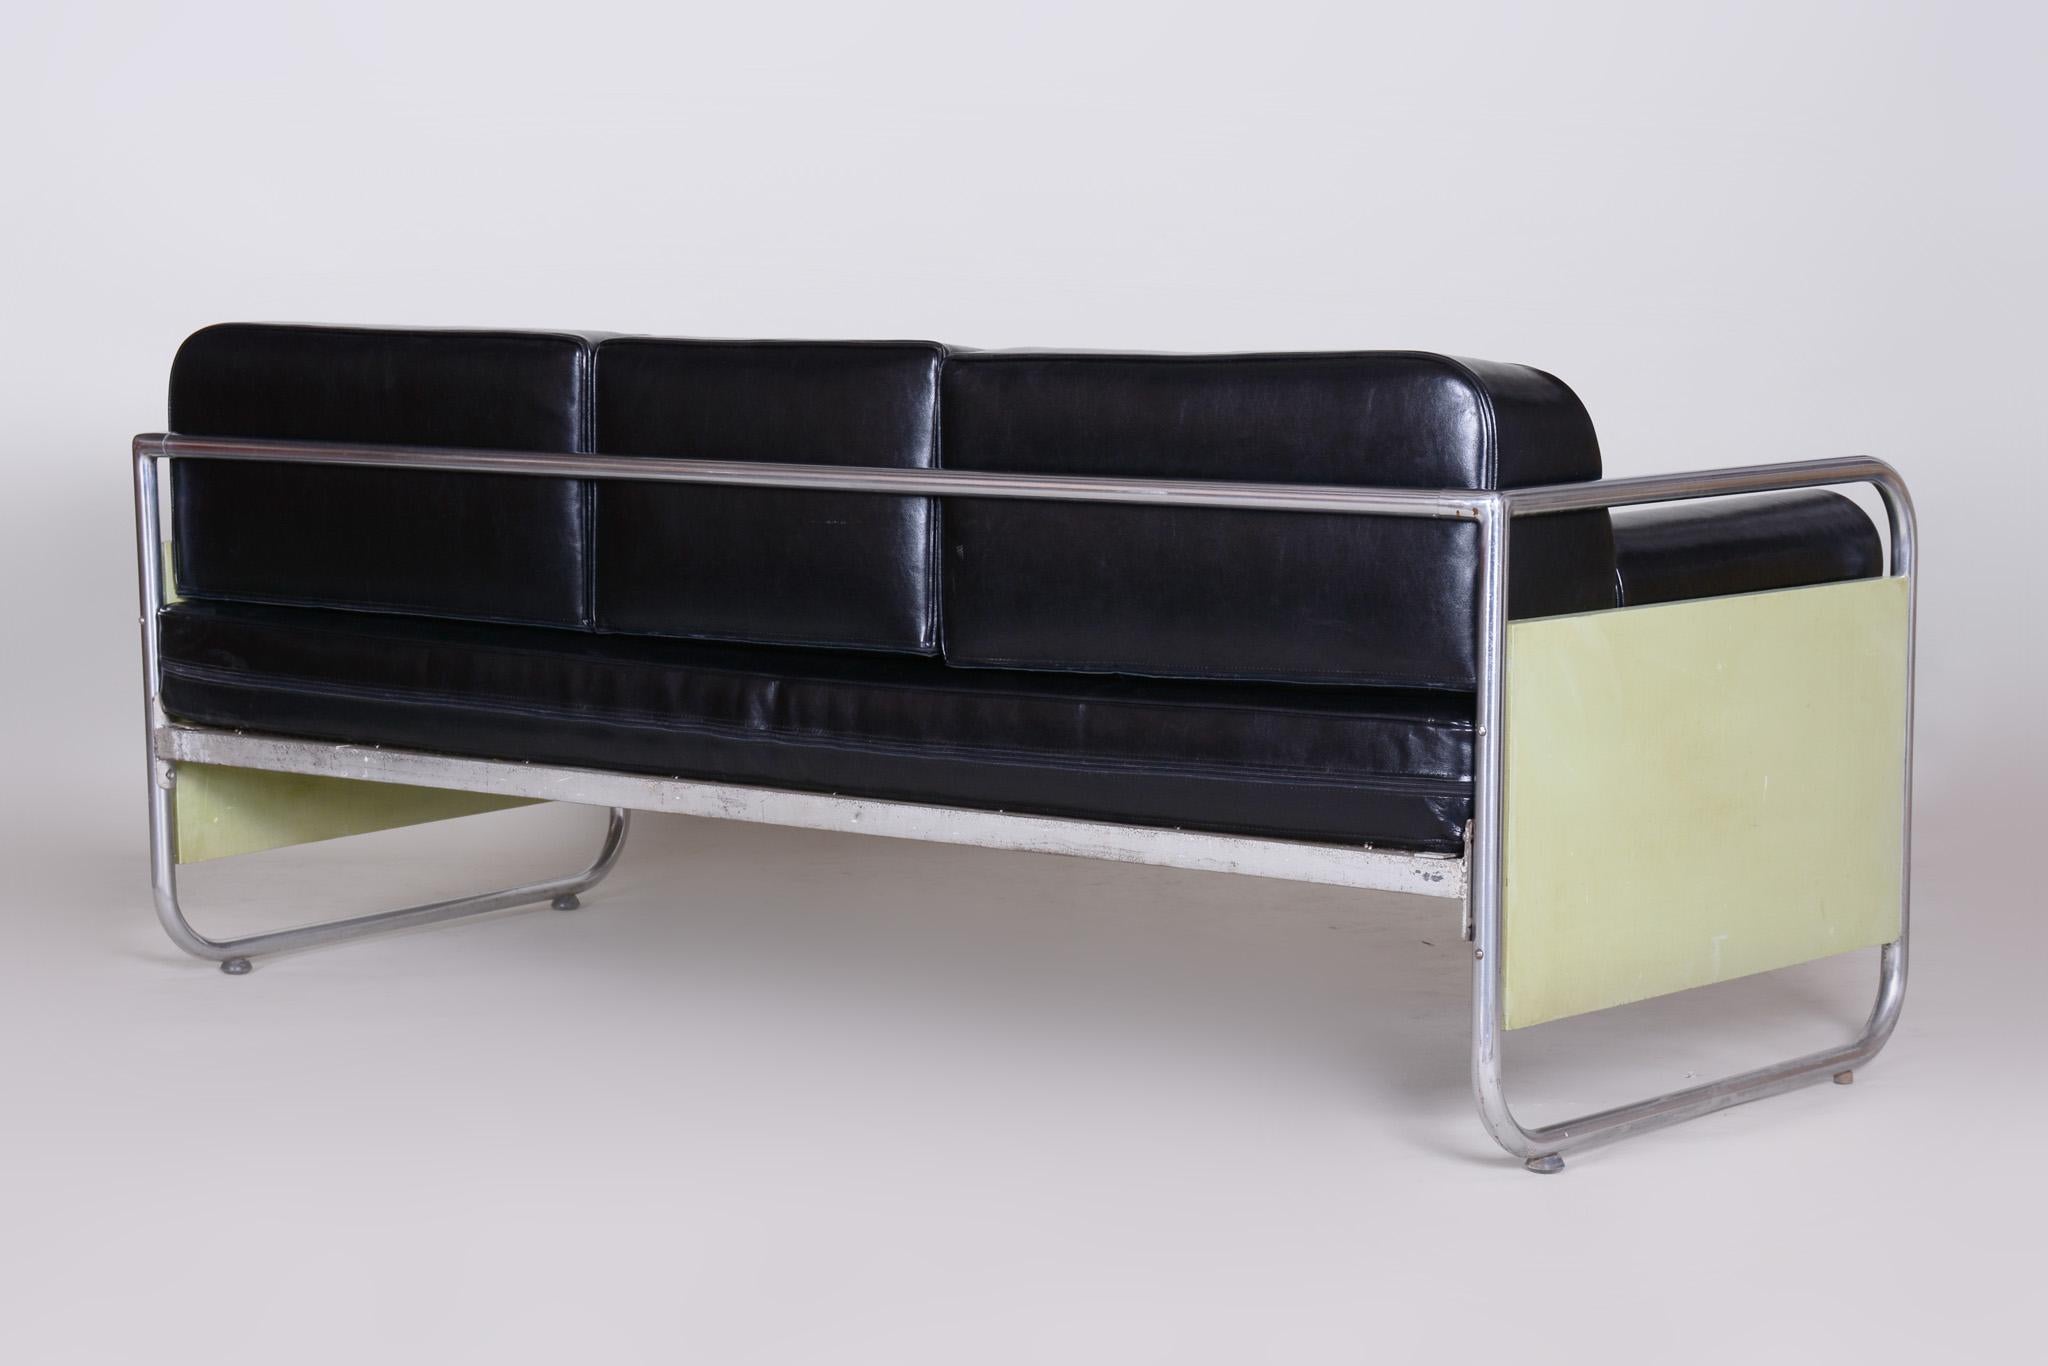 Fully Restored Bauhaus Leather and Chrome Sofa by Vichr a Spol, 1930s Czechia In Good Condition For Sale In Horomerice, CZ